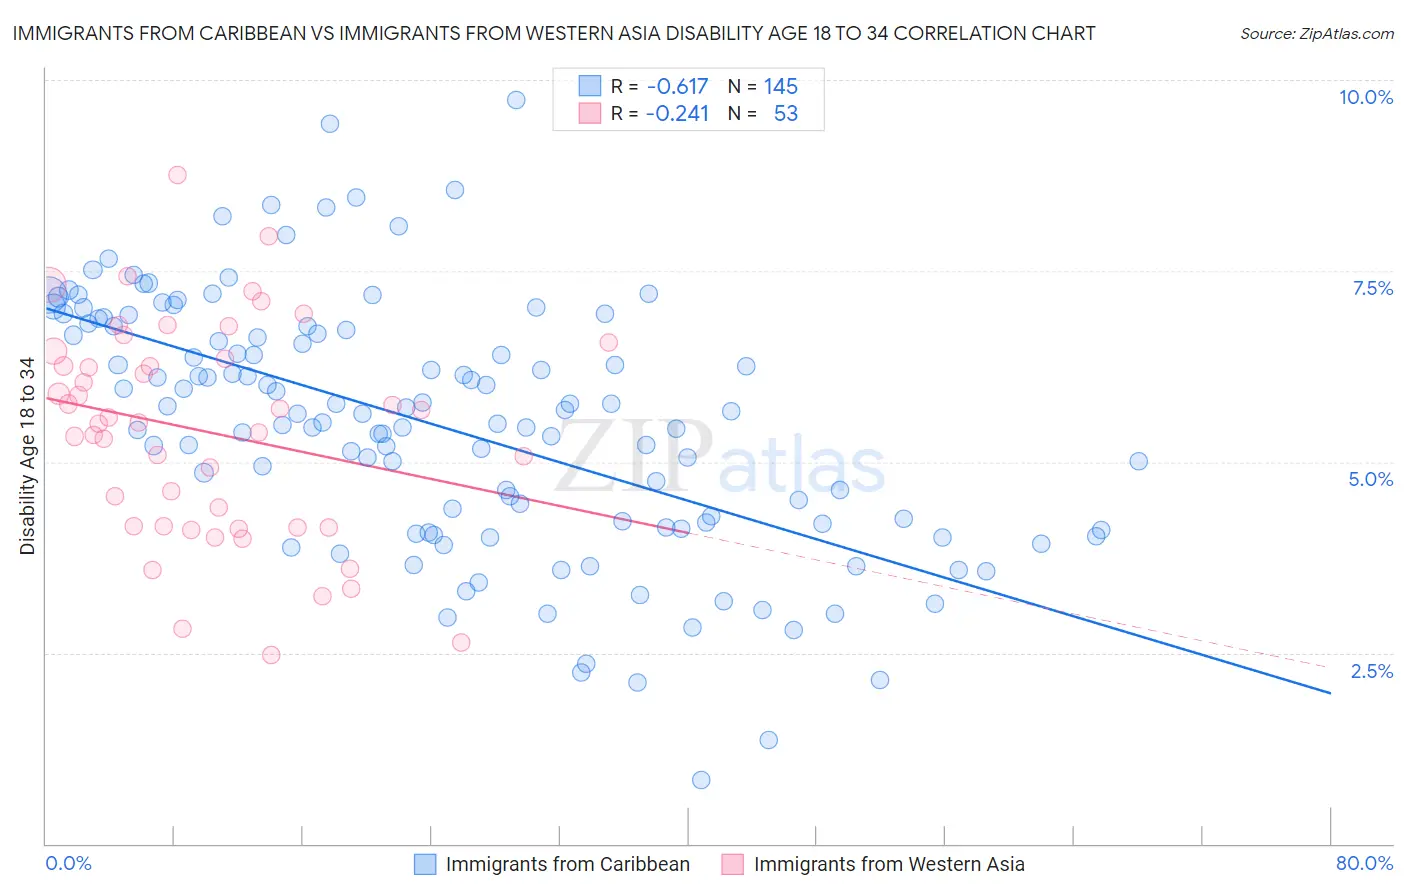 Immigrants from Caribbean vs Immigrants from Western Asia Disability Age 18 to 34